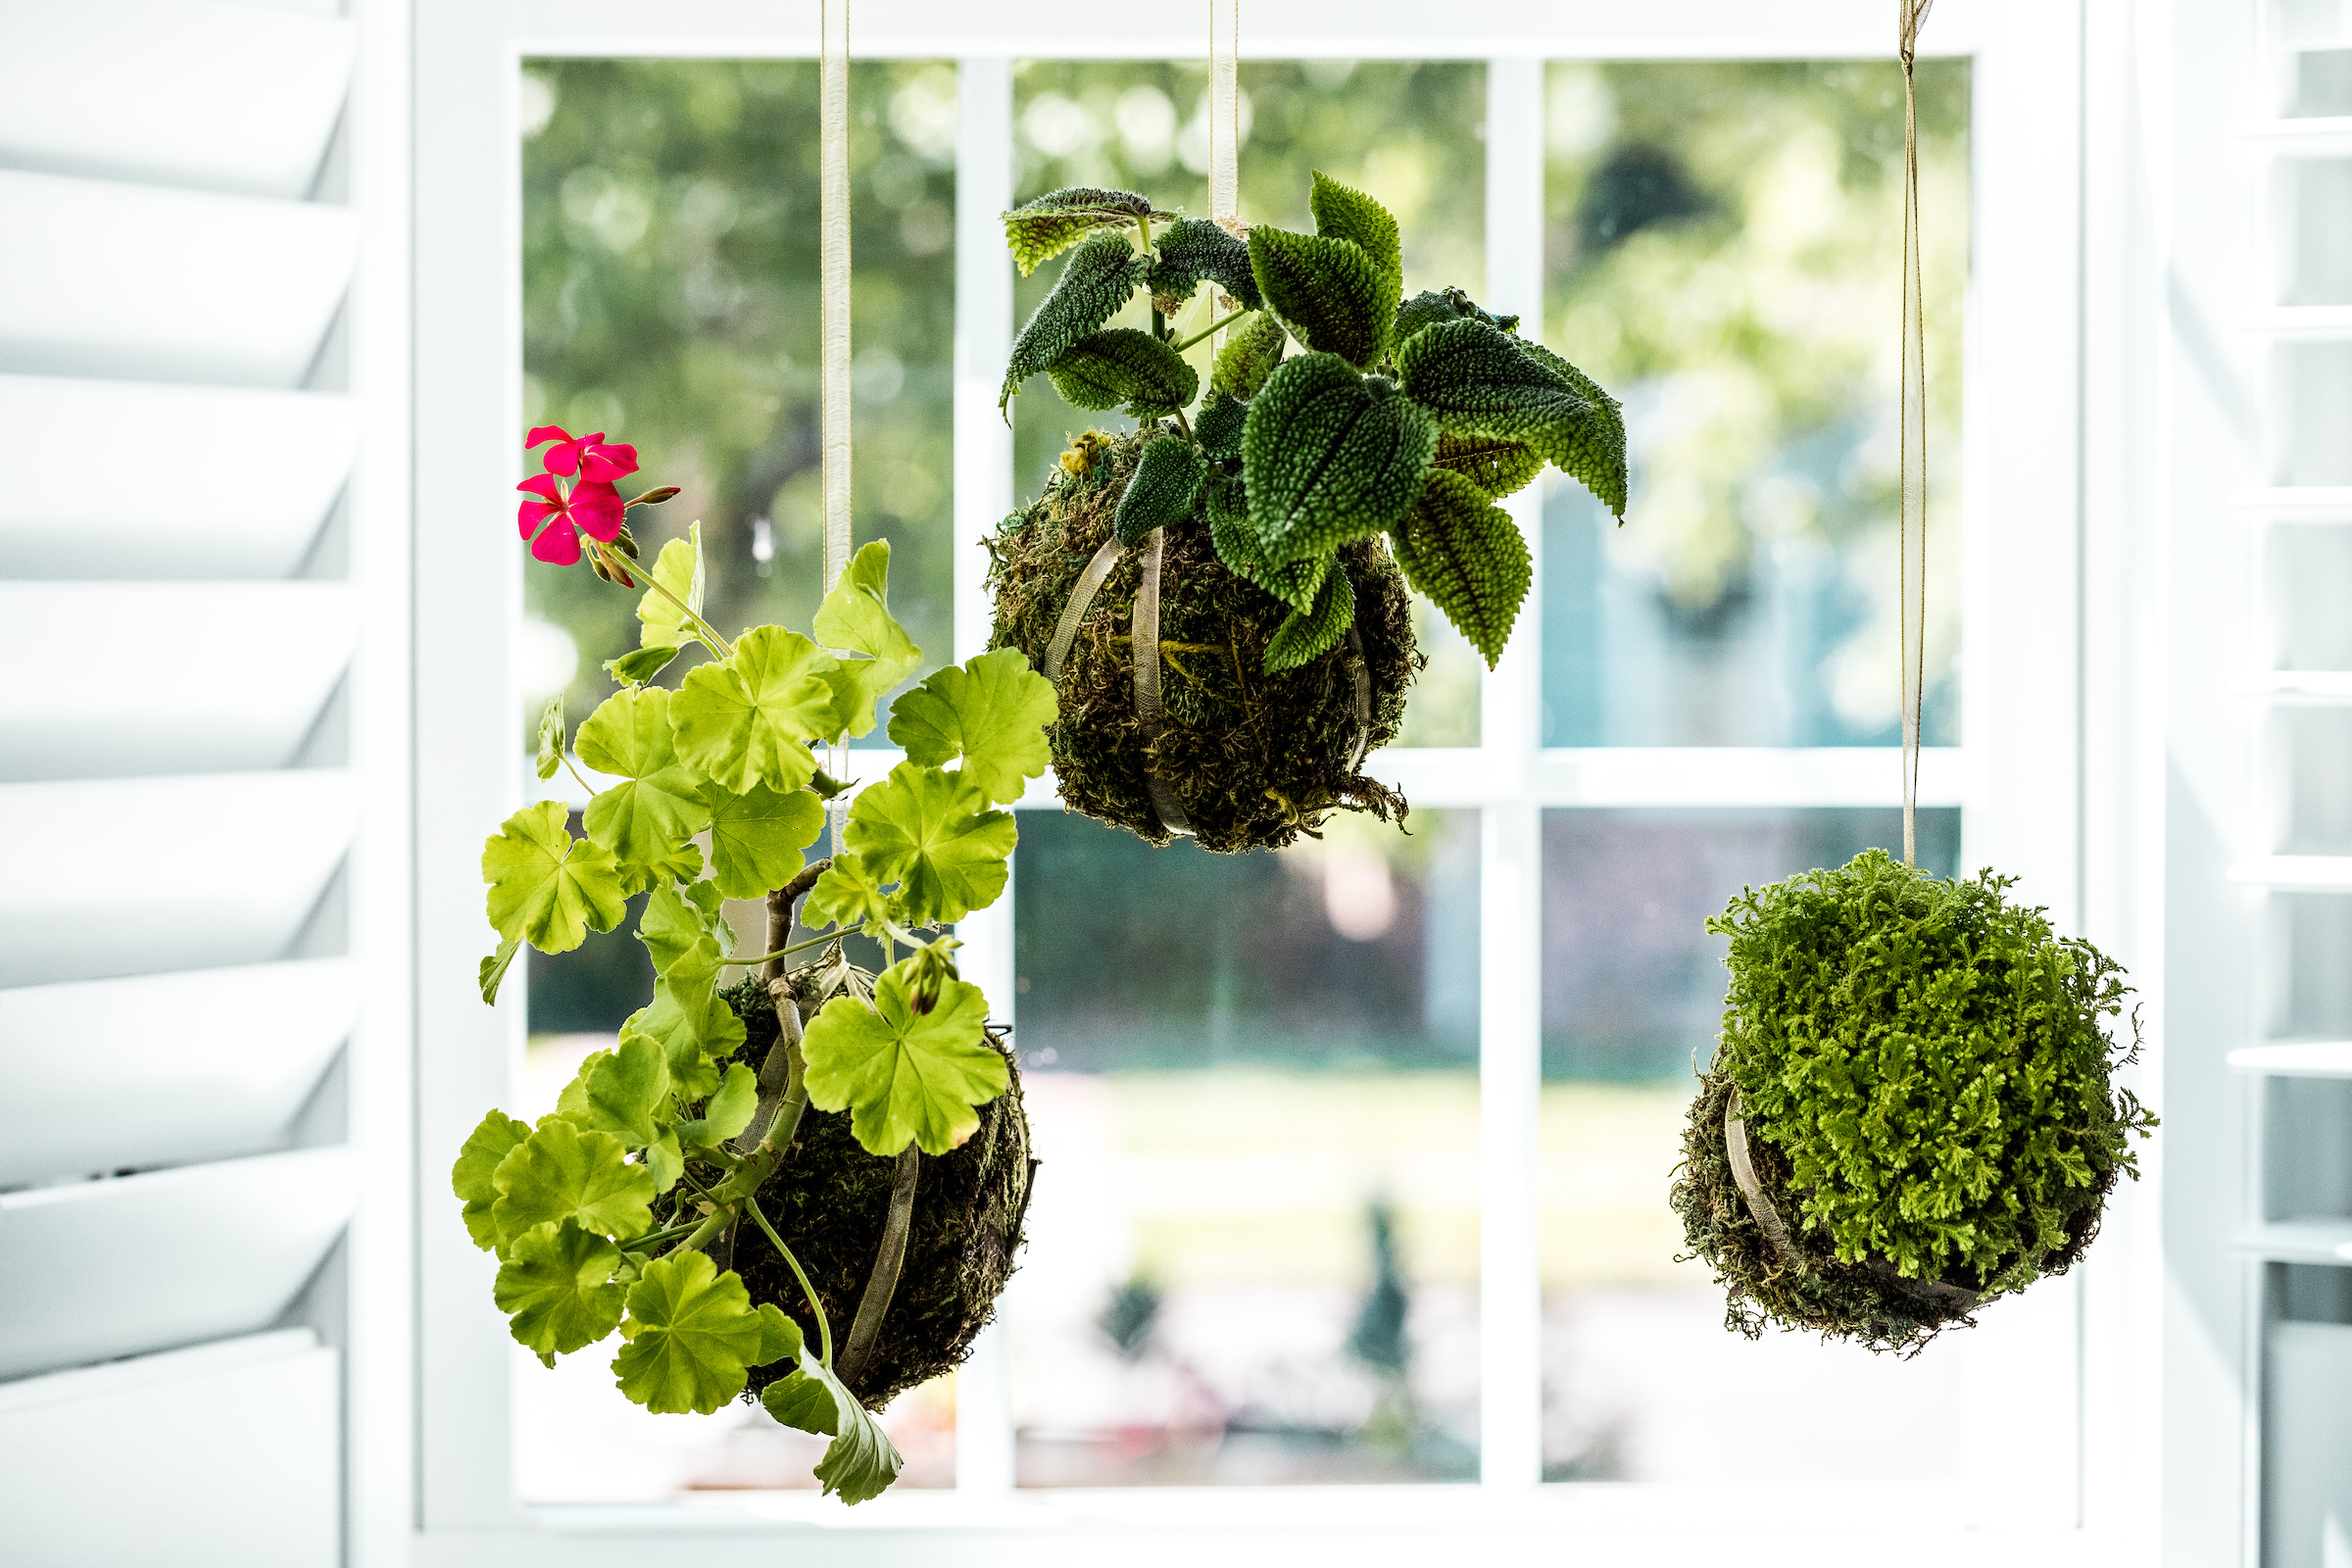 Once the moss is held securely by twine, add an extra layer of twine or decorative ribbon that can be used for hanging.